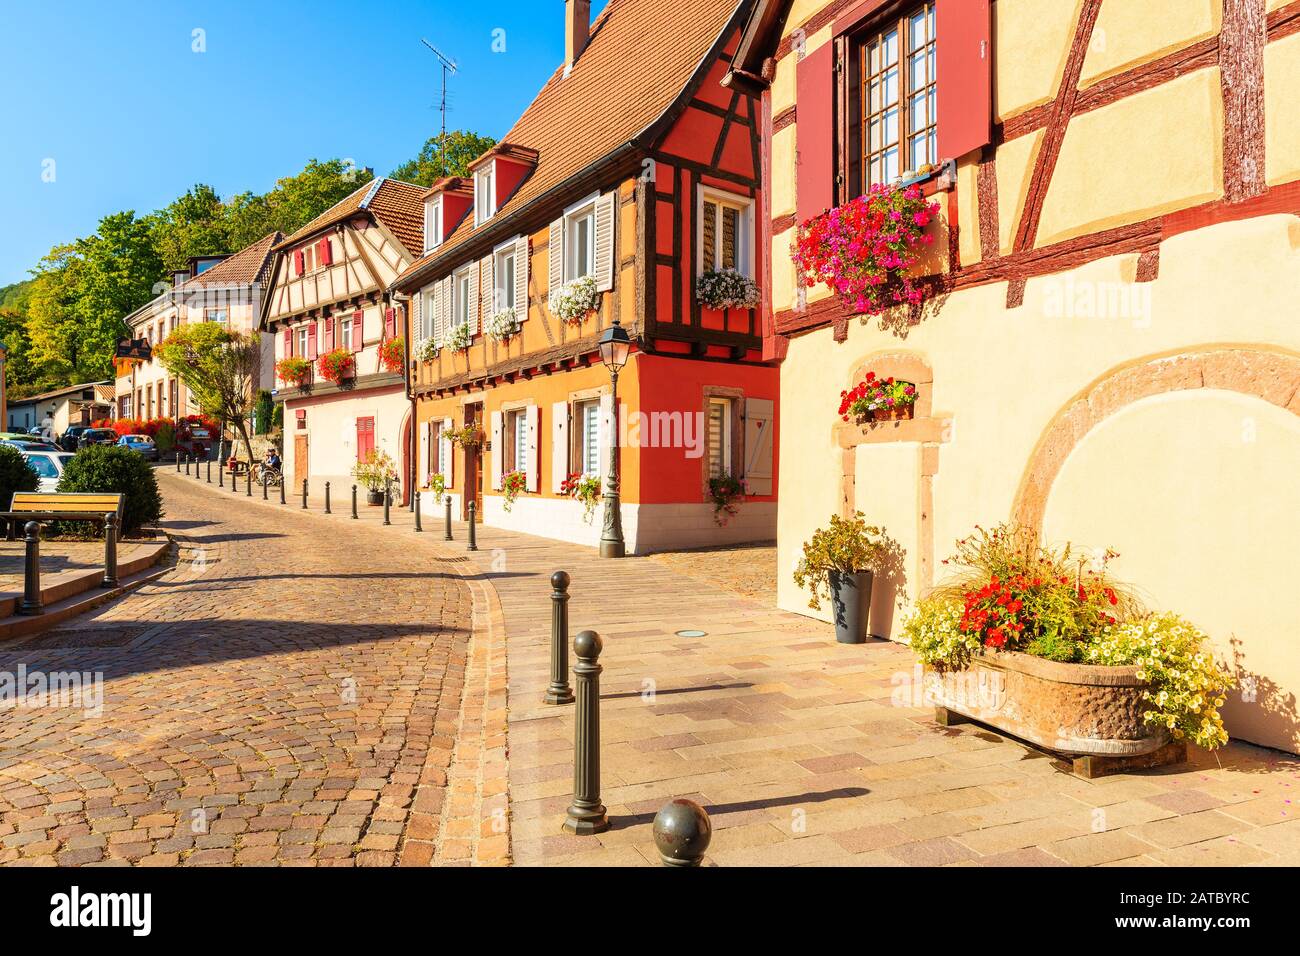 Beautiful traditional colorful houses in picturesque Ribeauville village, Alsace wine region, France Stock Photo